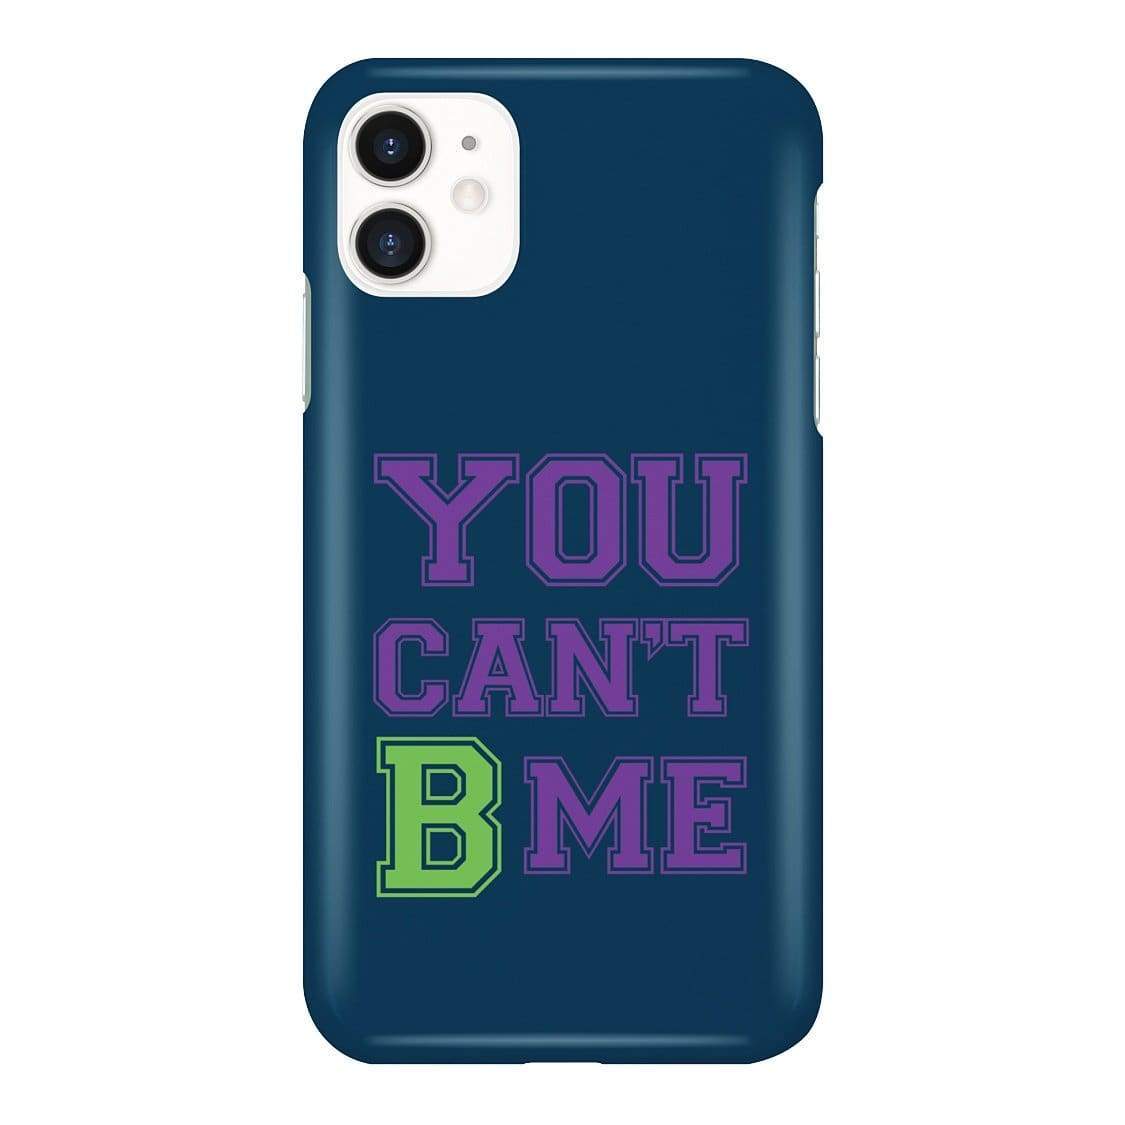 All Nerds Here You Can’t B Me Phone Case - Snap * iPhone * Samsung * - iPhone 11 Case / Gloss / Apparel